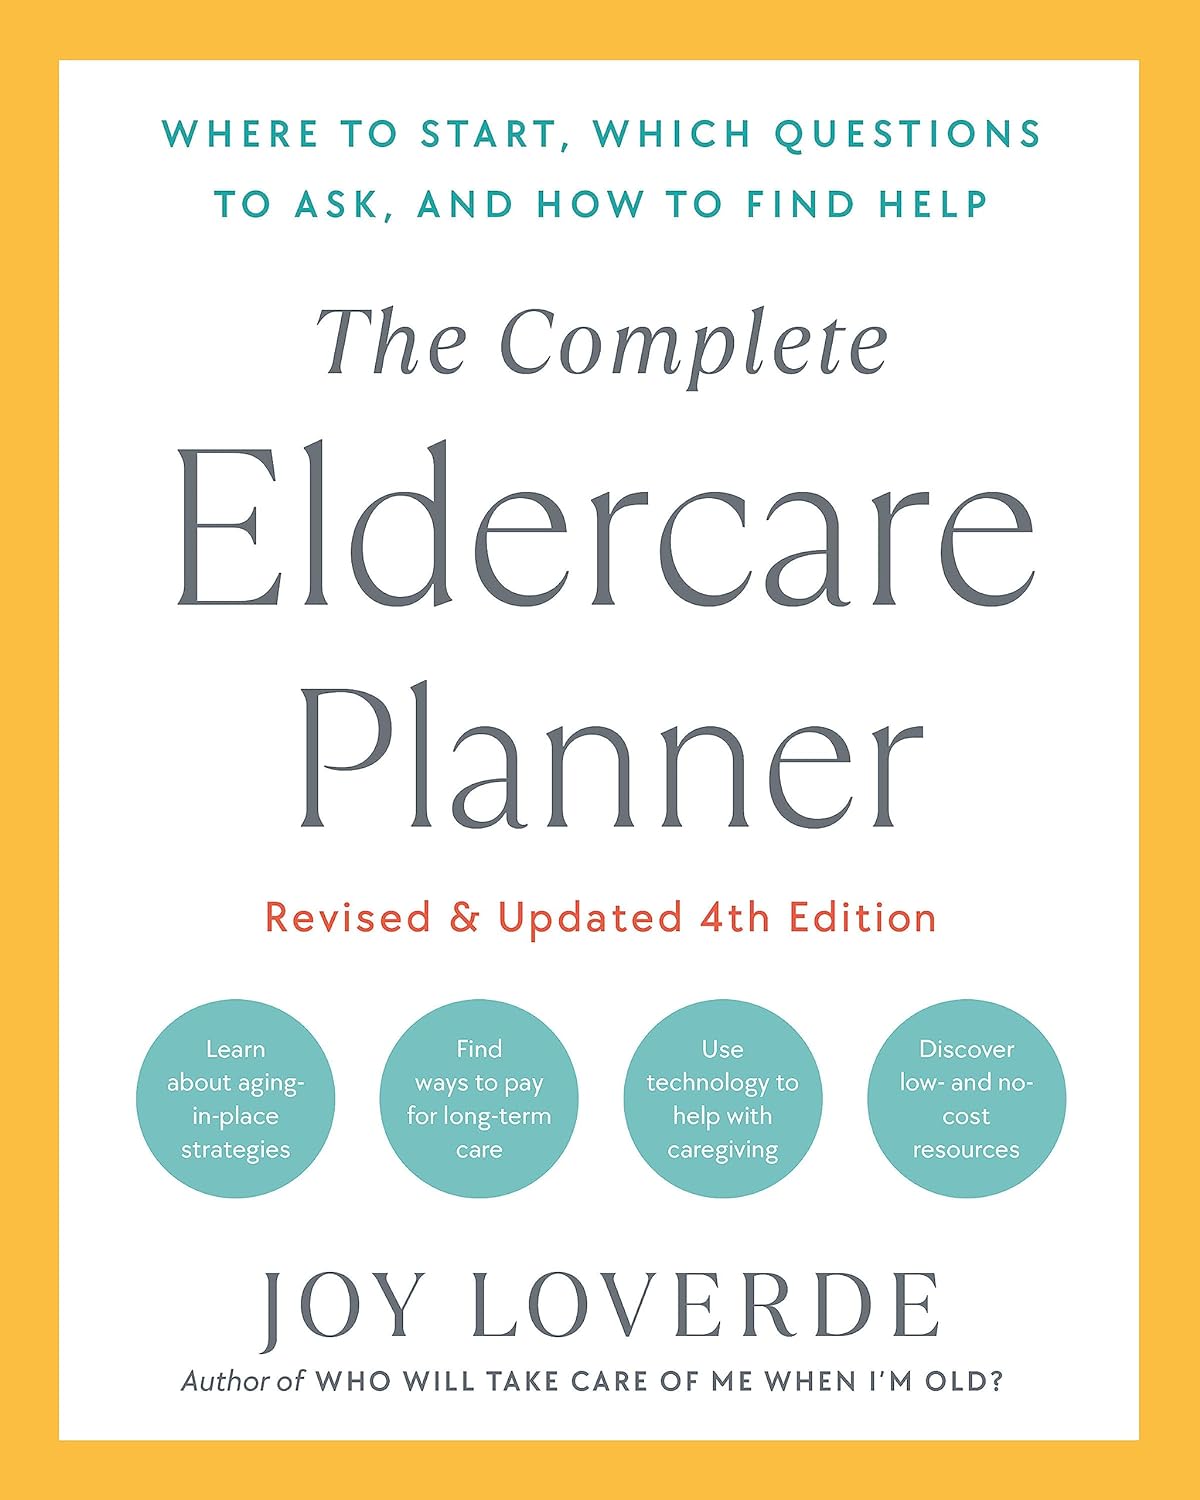 The Complete Eldercare Planner, Revised and Updated 4th Edition Where to Start, Which Questions to Ask, and How to Find Help - SureShot Books Publishing LLC